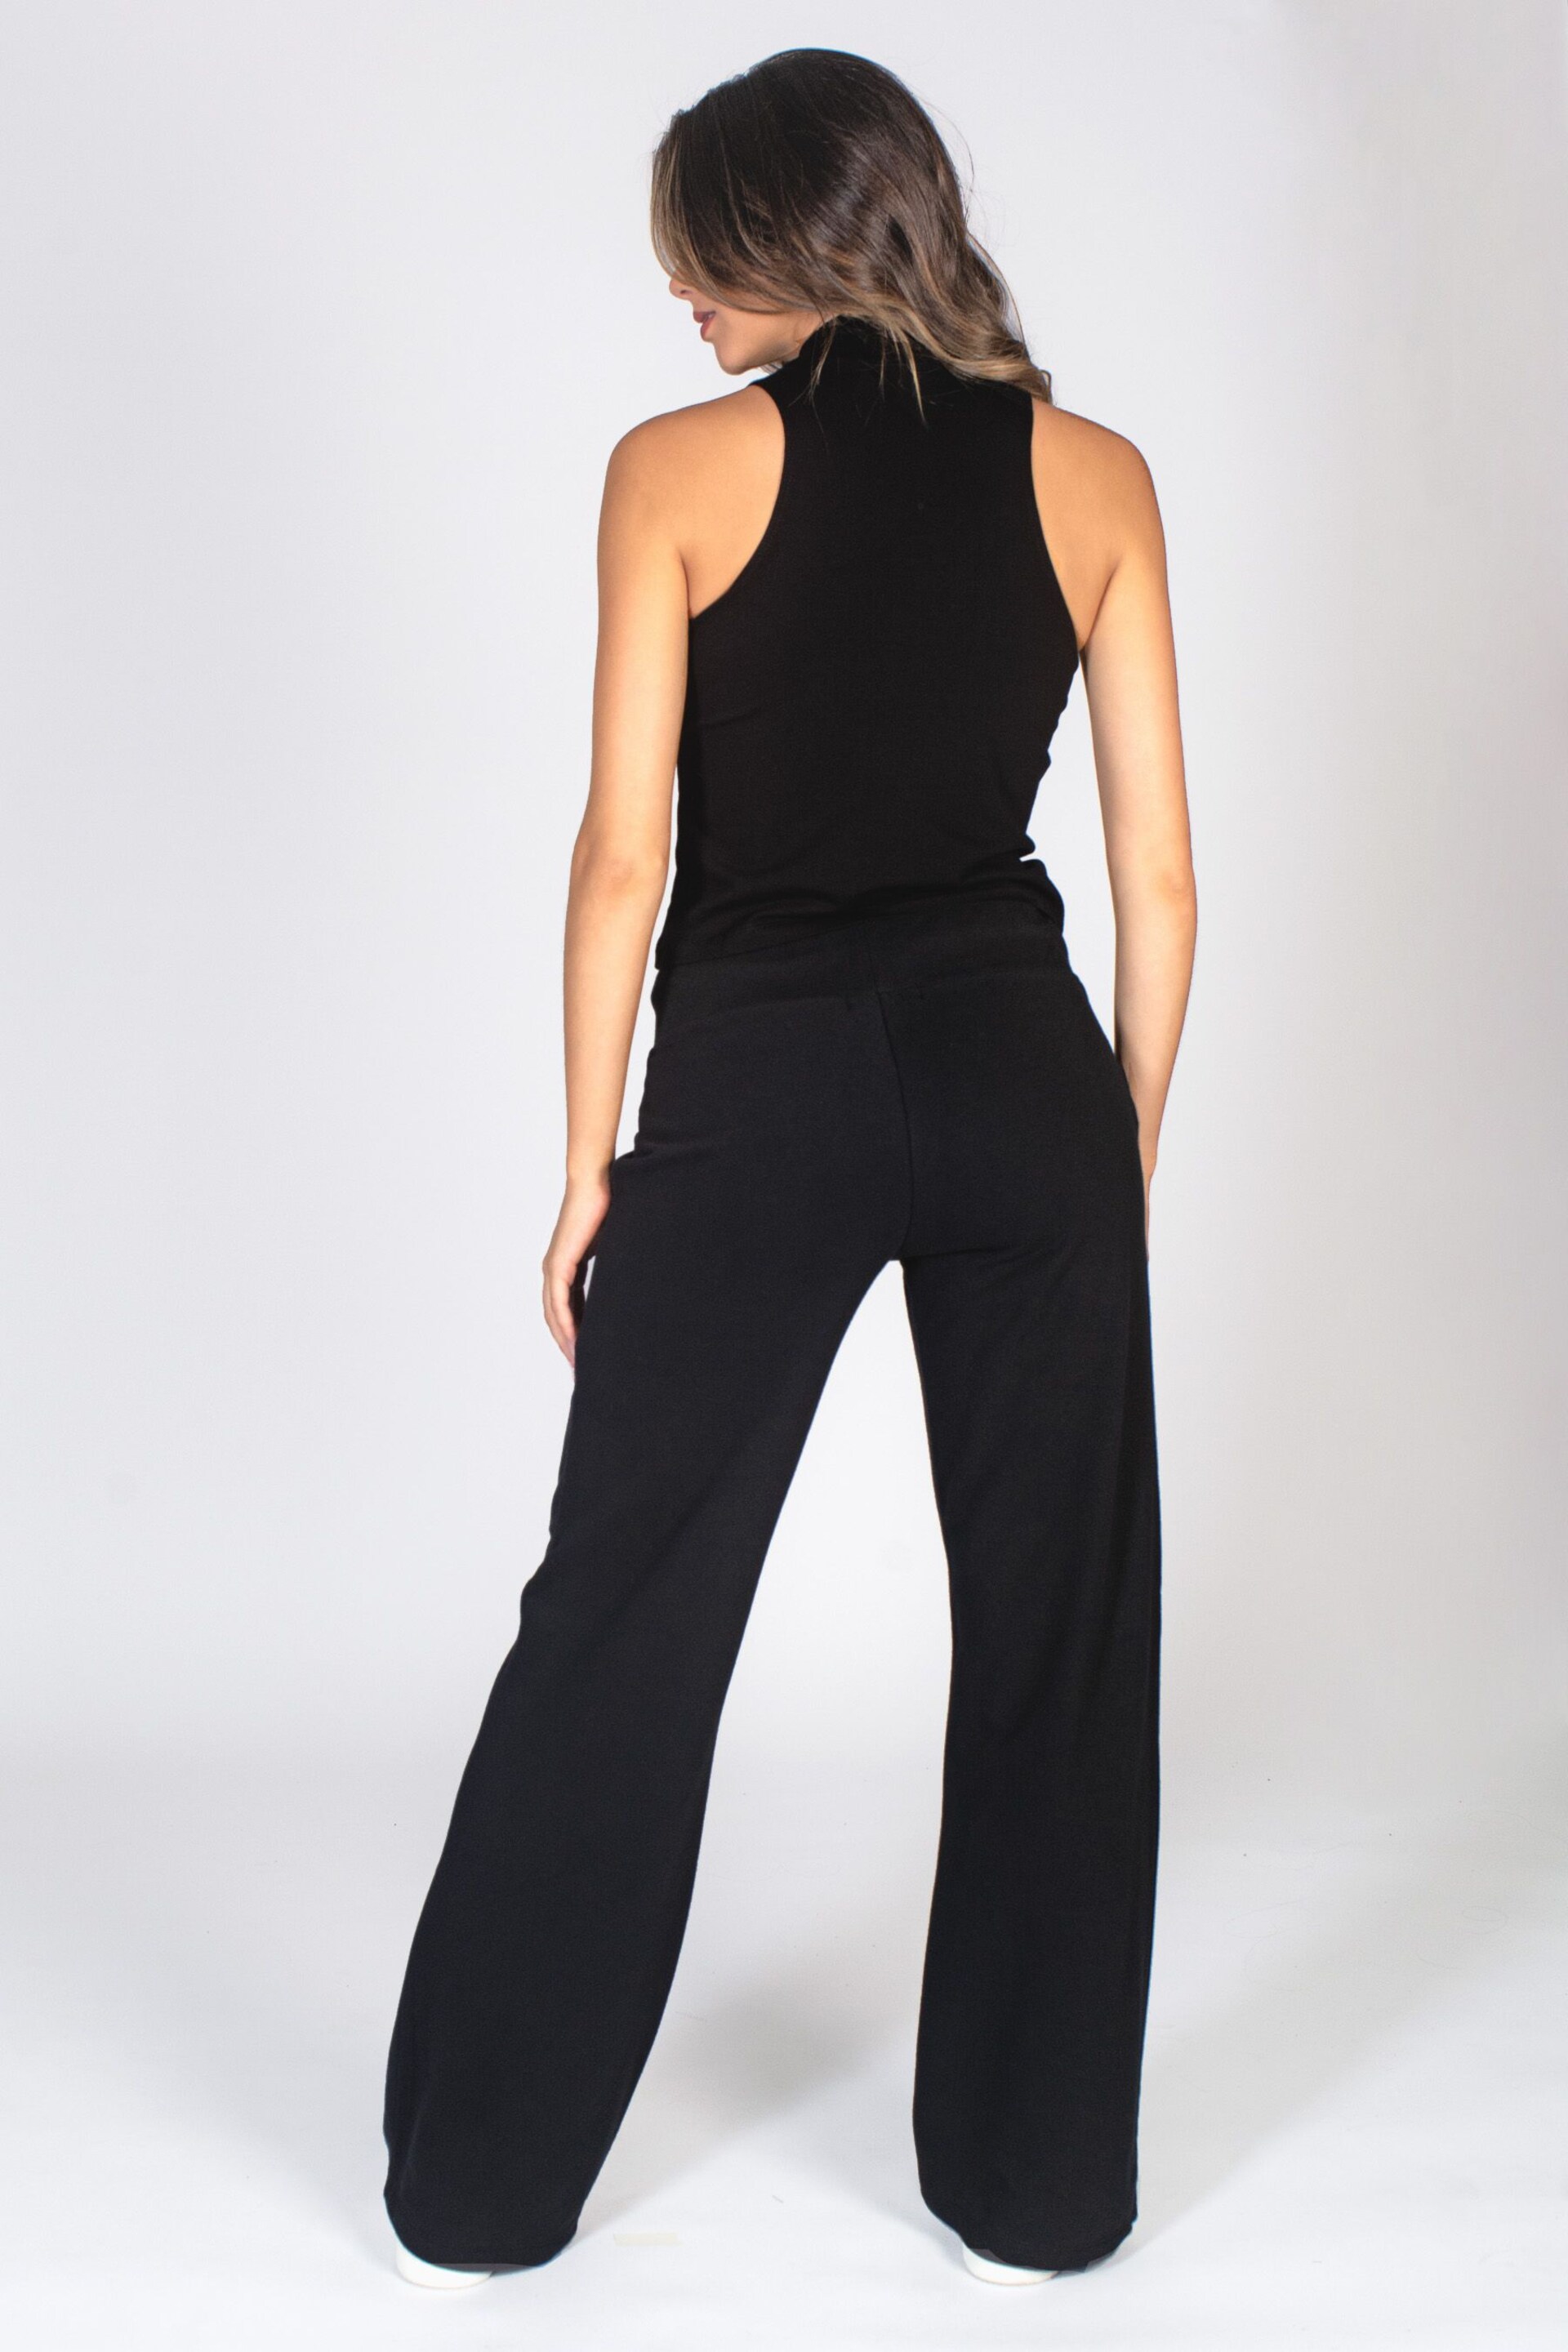 Pineapple Black Essential Womens Wide Leg Joggers - Image 4 of 6